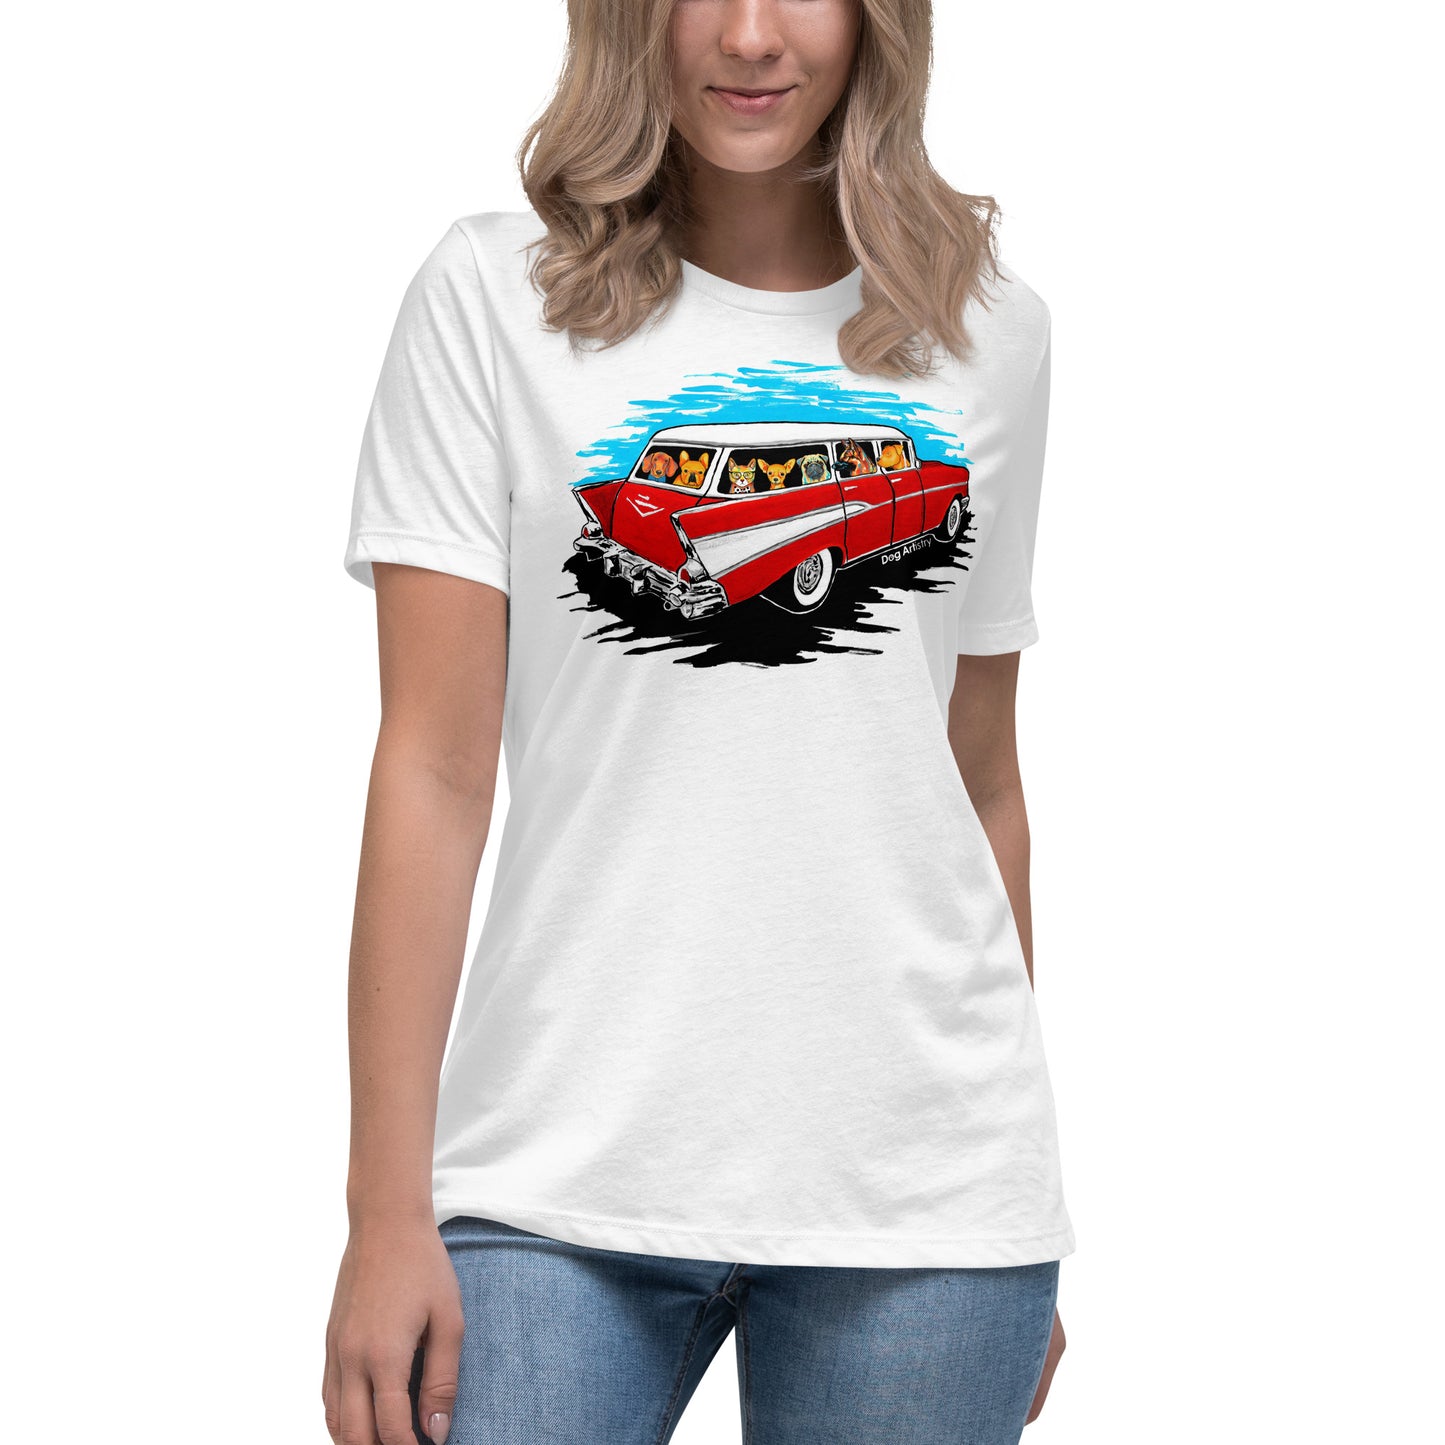 Dog Artistry Relaxed Women’s T-Shirt of a 57 Chevy Wagon full of dogs, Dachshund, French Bulldog, Cat, Chihuahua, Pug, German Shepherd, and Pit Bull.